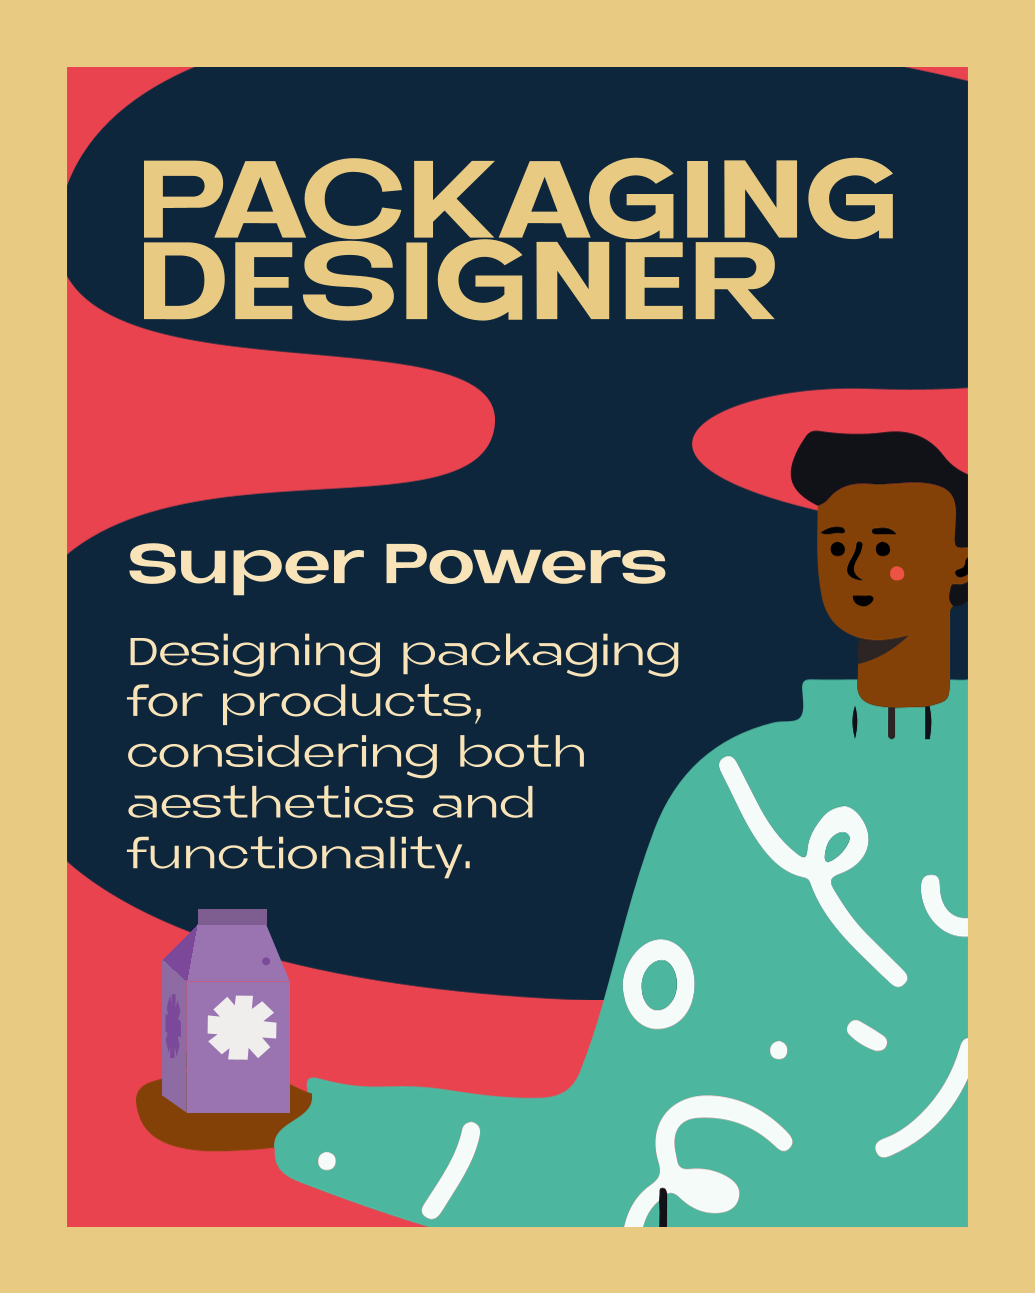 PACKAGING DESIGNER – Super Powers: Designing packaging for products, considering both aesthetics and functionality.
